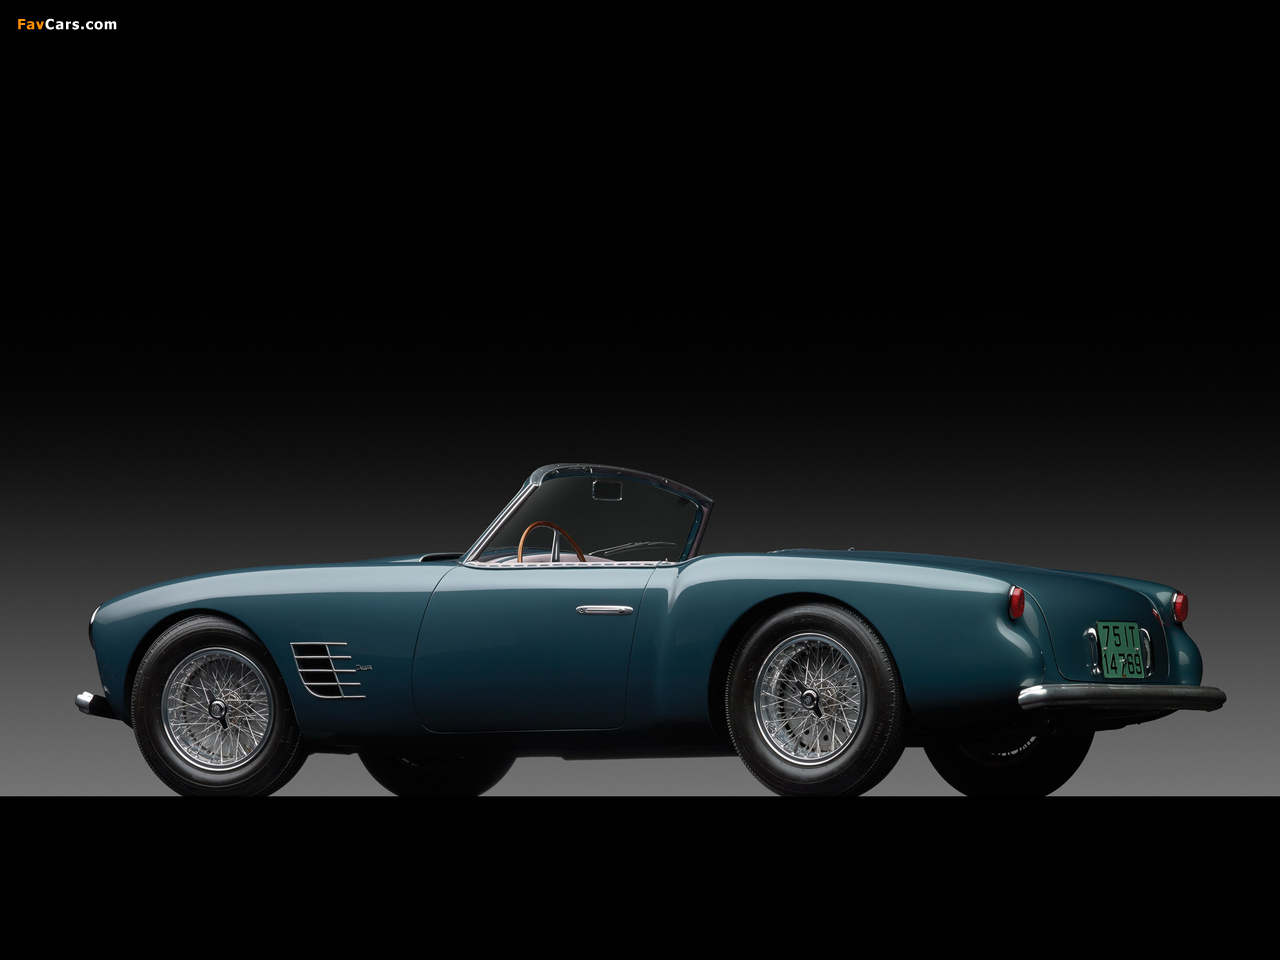 Pictures of Maserati A6G 2000 Spider 1954 (1280 x 960)